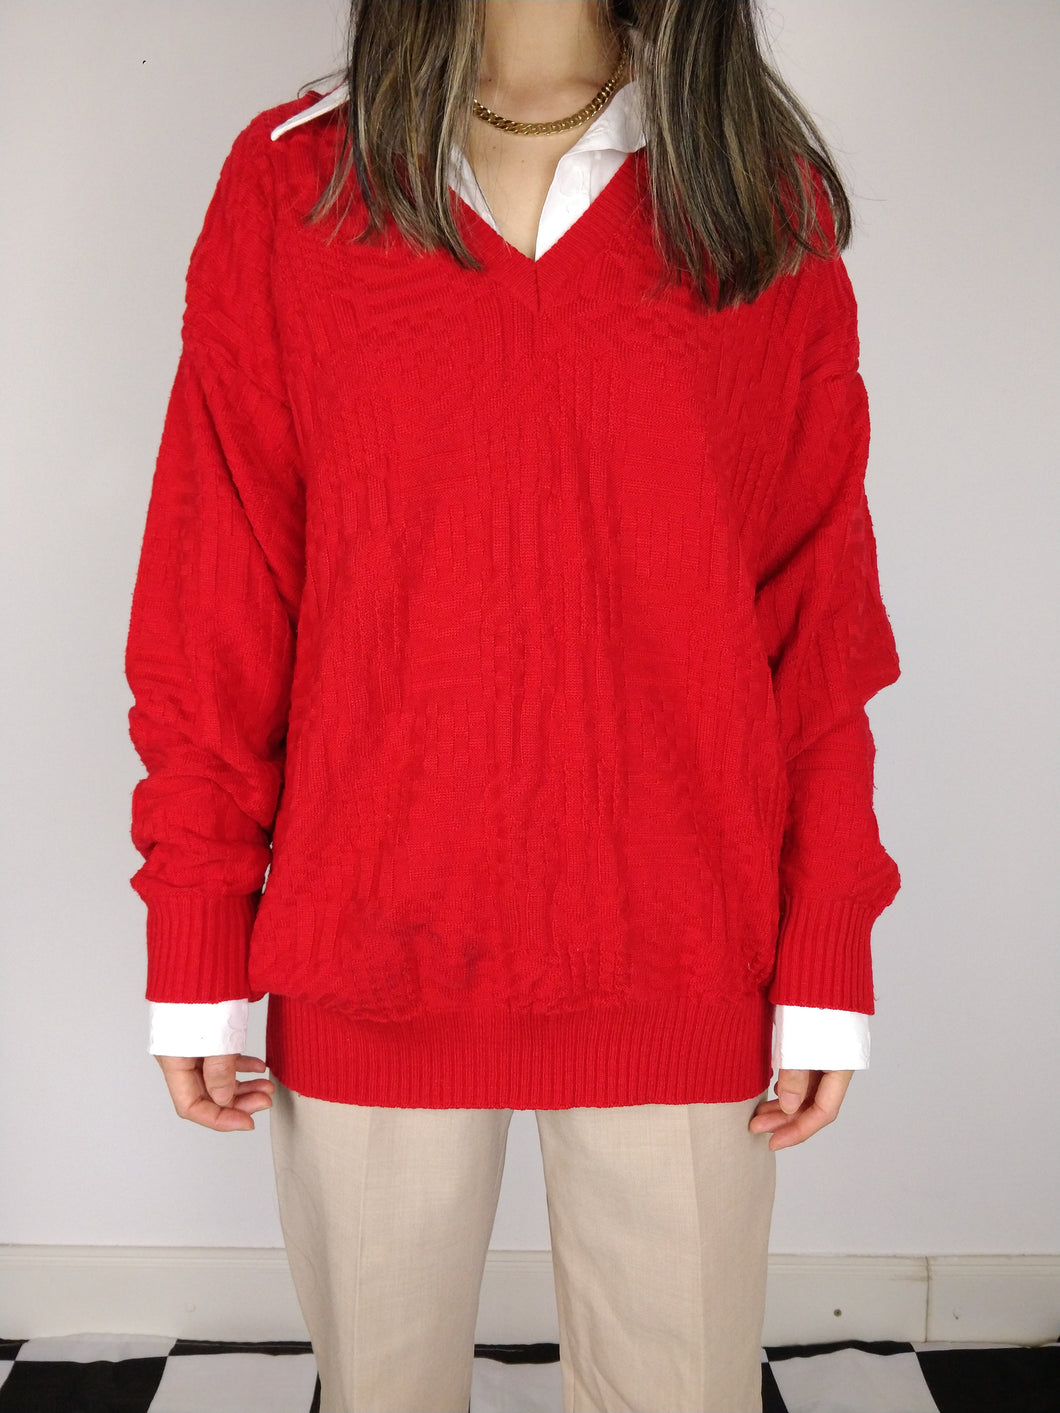 The Red Knit | Vintage red structured pattern light knit sweater pullover L